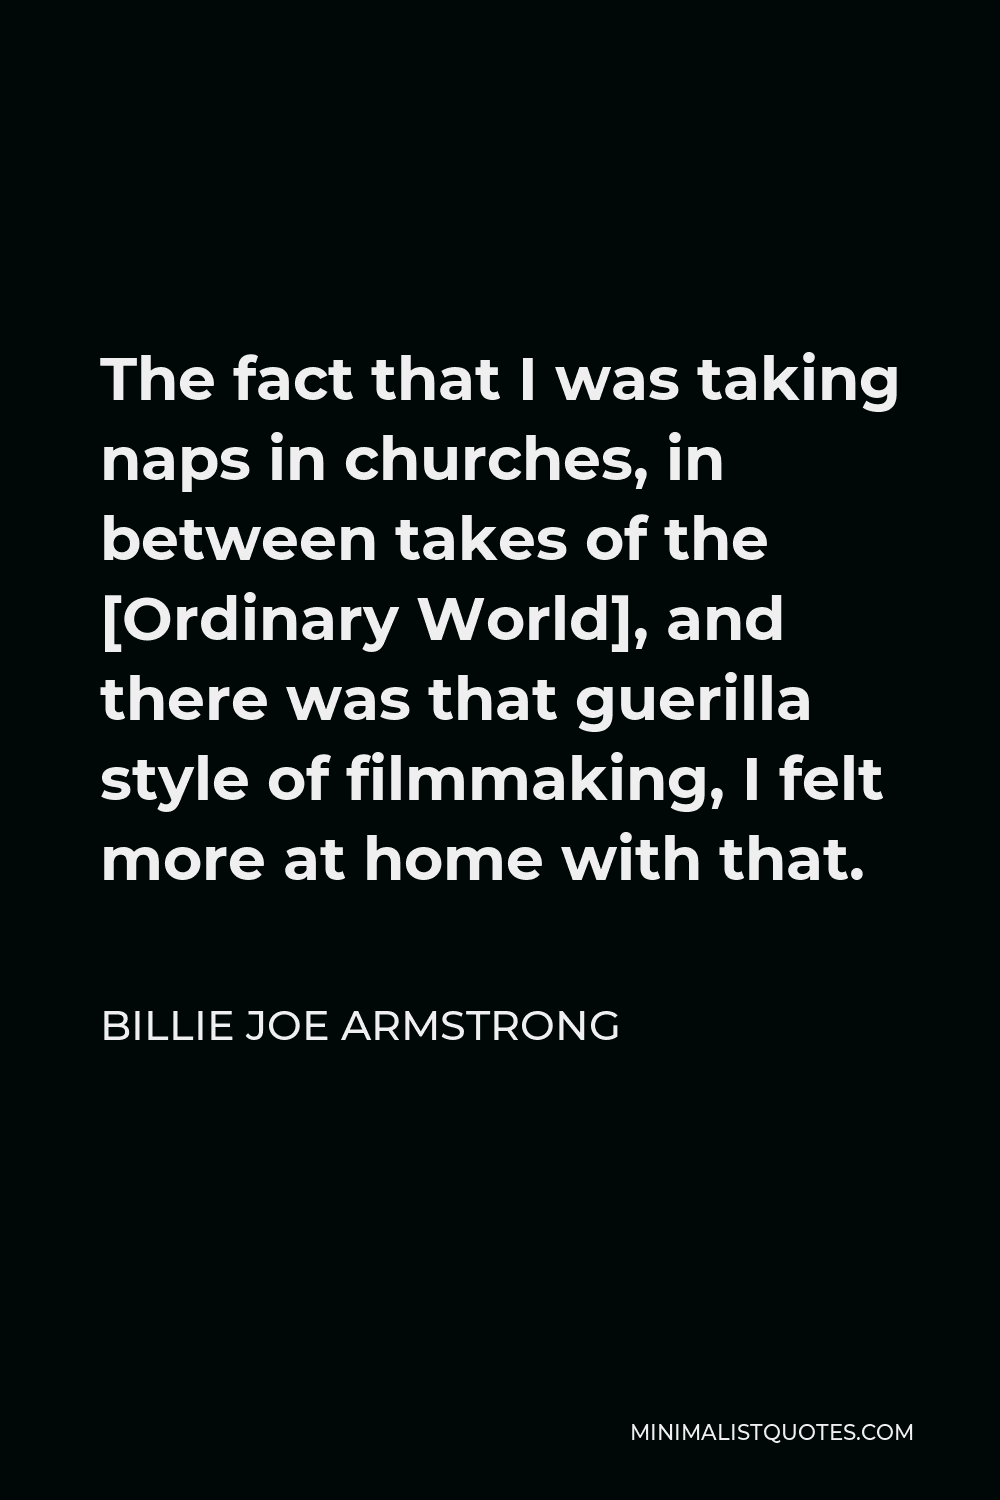 Billie Joe Armstrong Quote - The fact that I was taking naps in churches, in between takes of the [Ordinary World], and there was that guerilla style of filmmaking, I felt more at home with that.